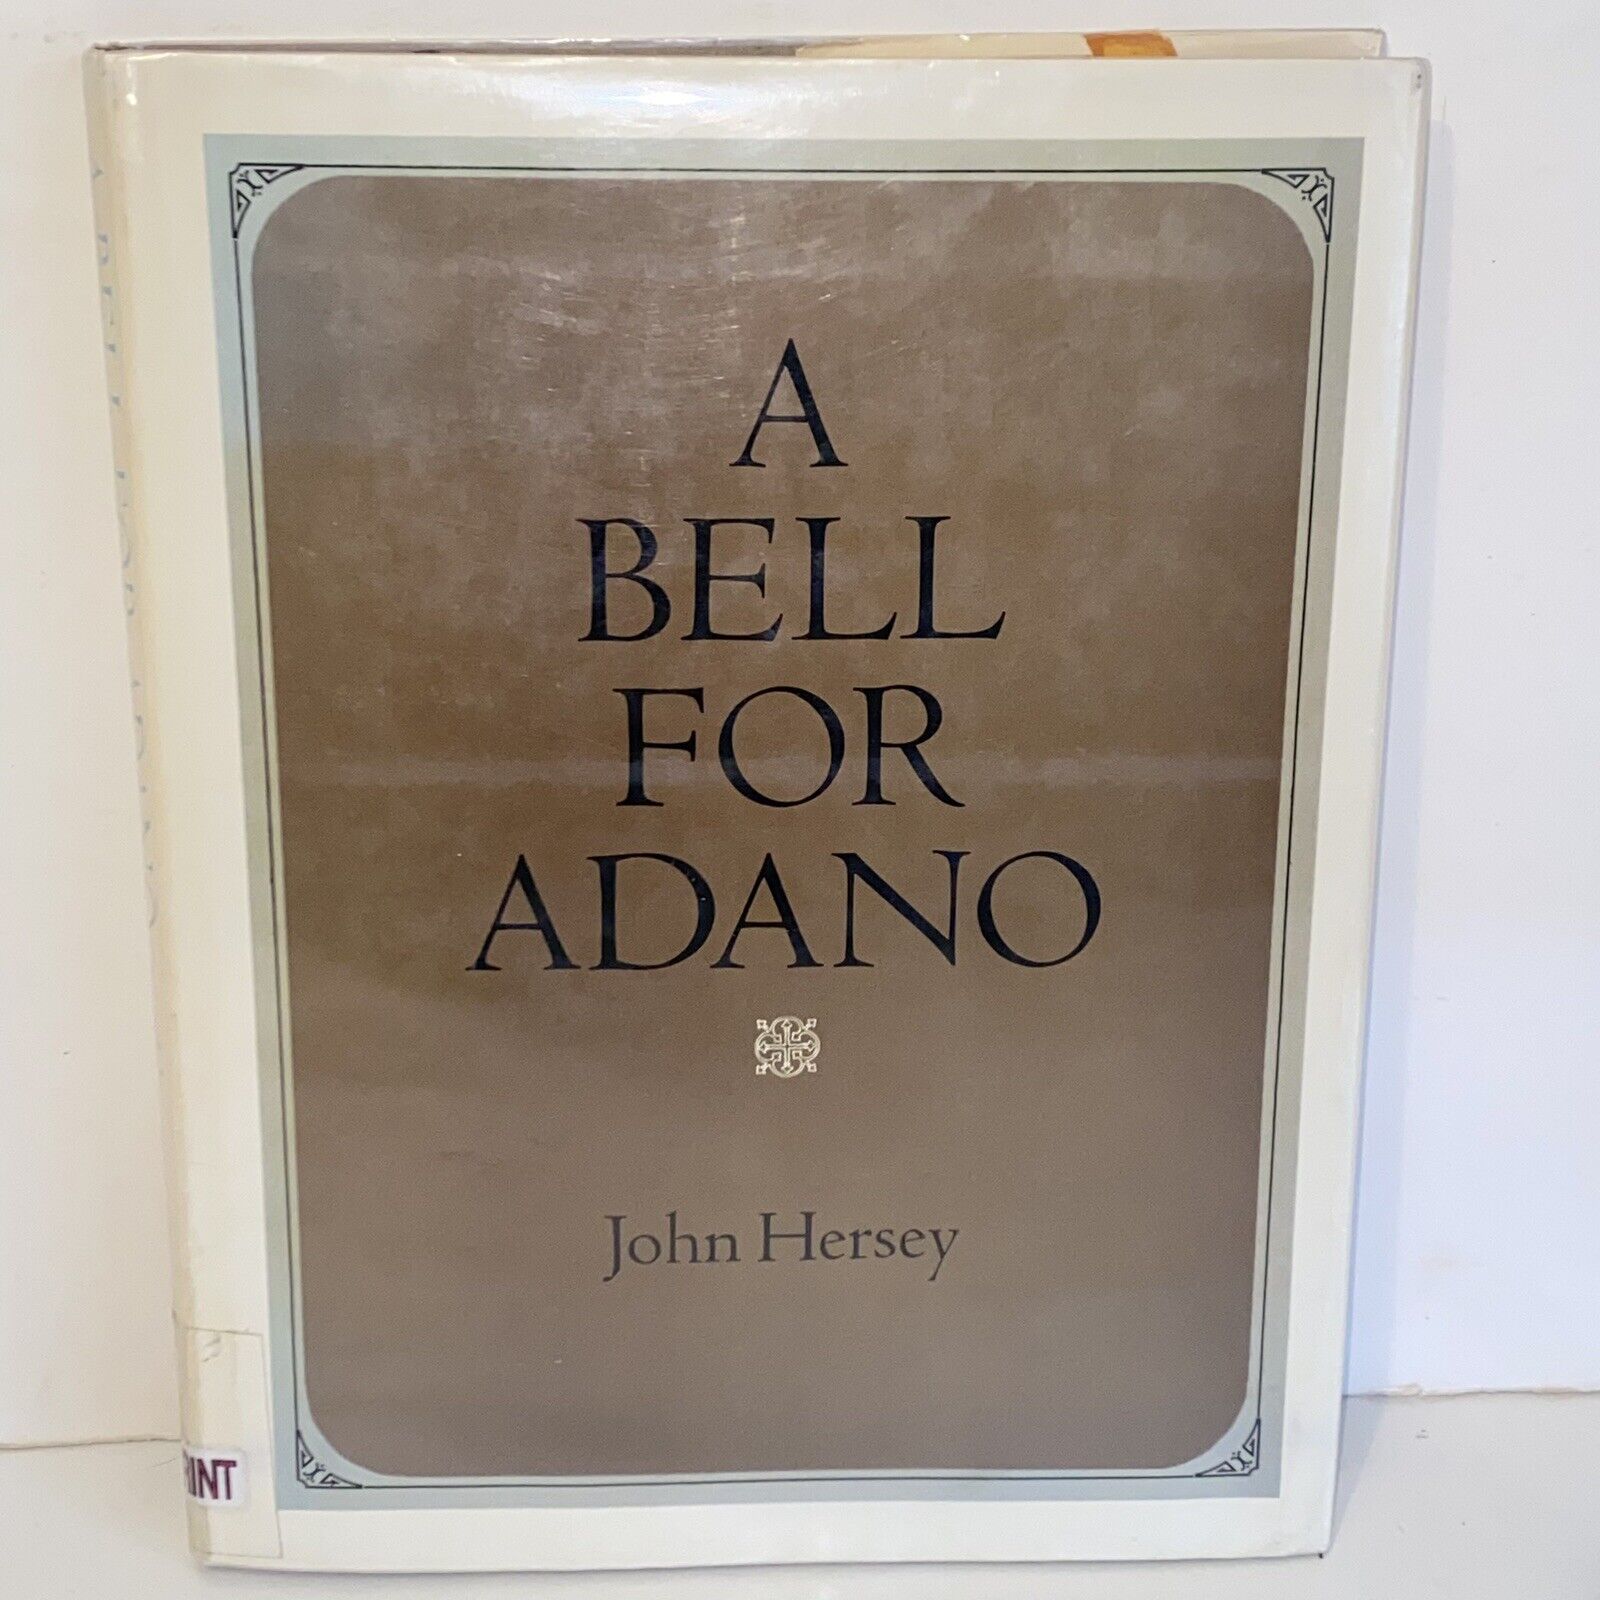 Vintage 1944 A Bell For Adano by John Hersey Hardcover Large Print Edition